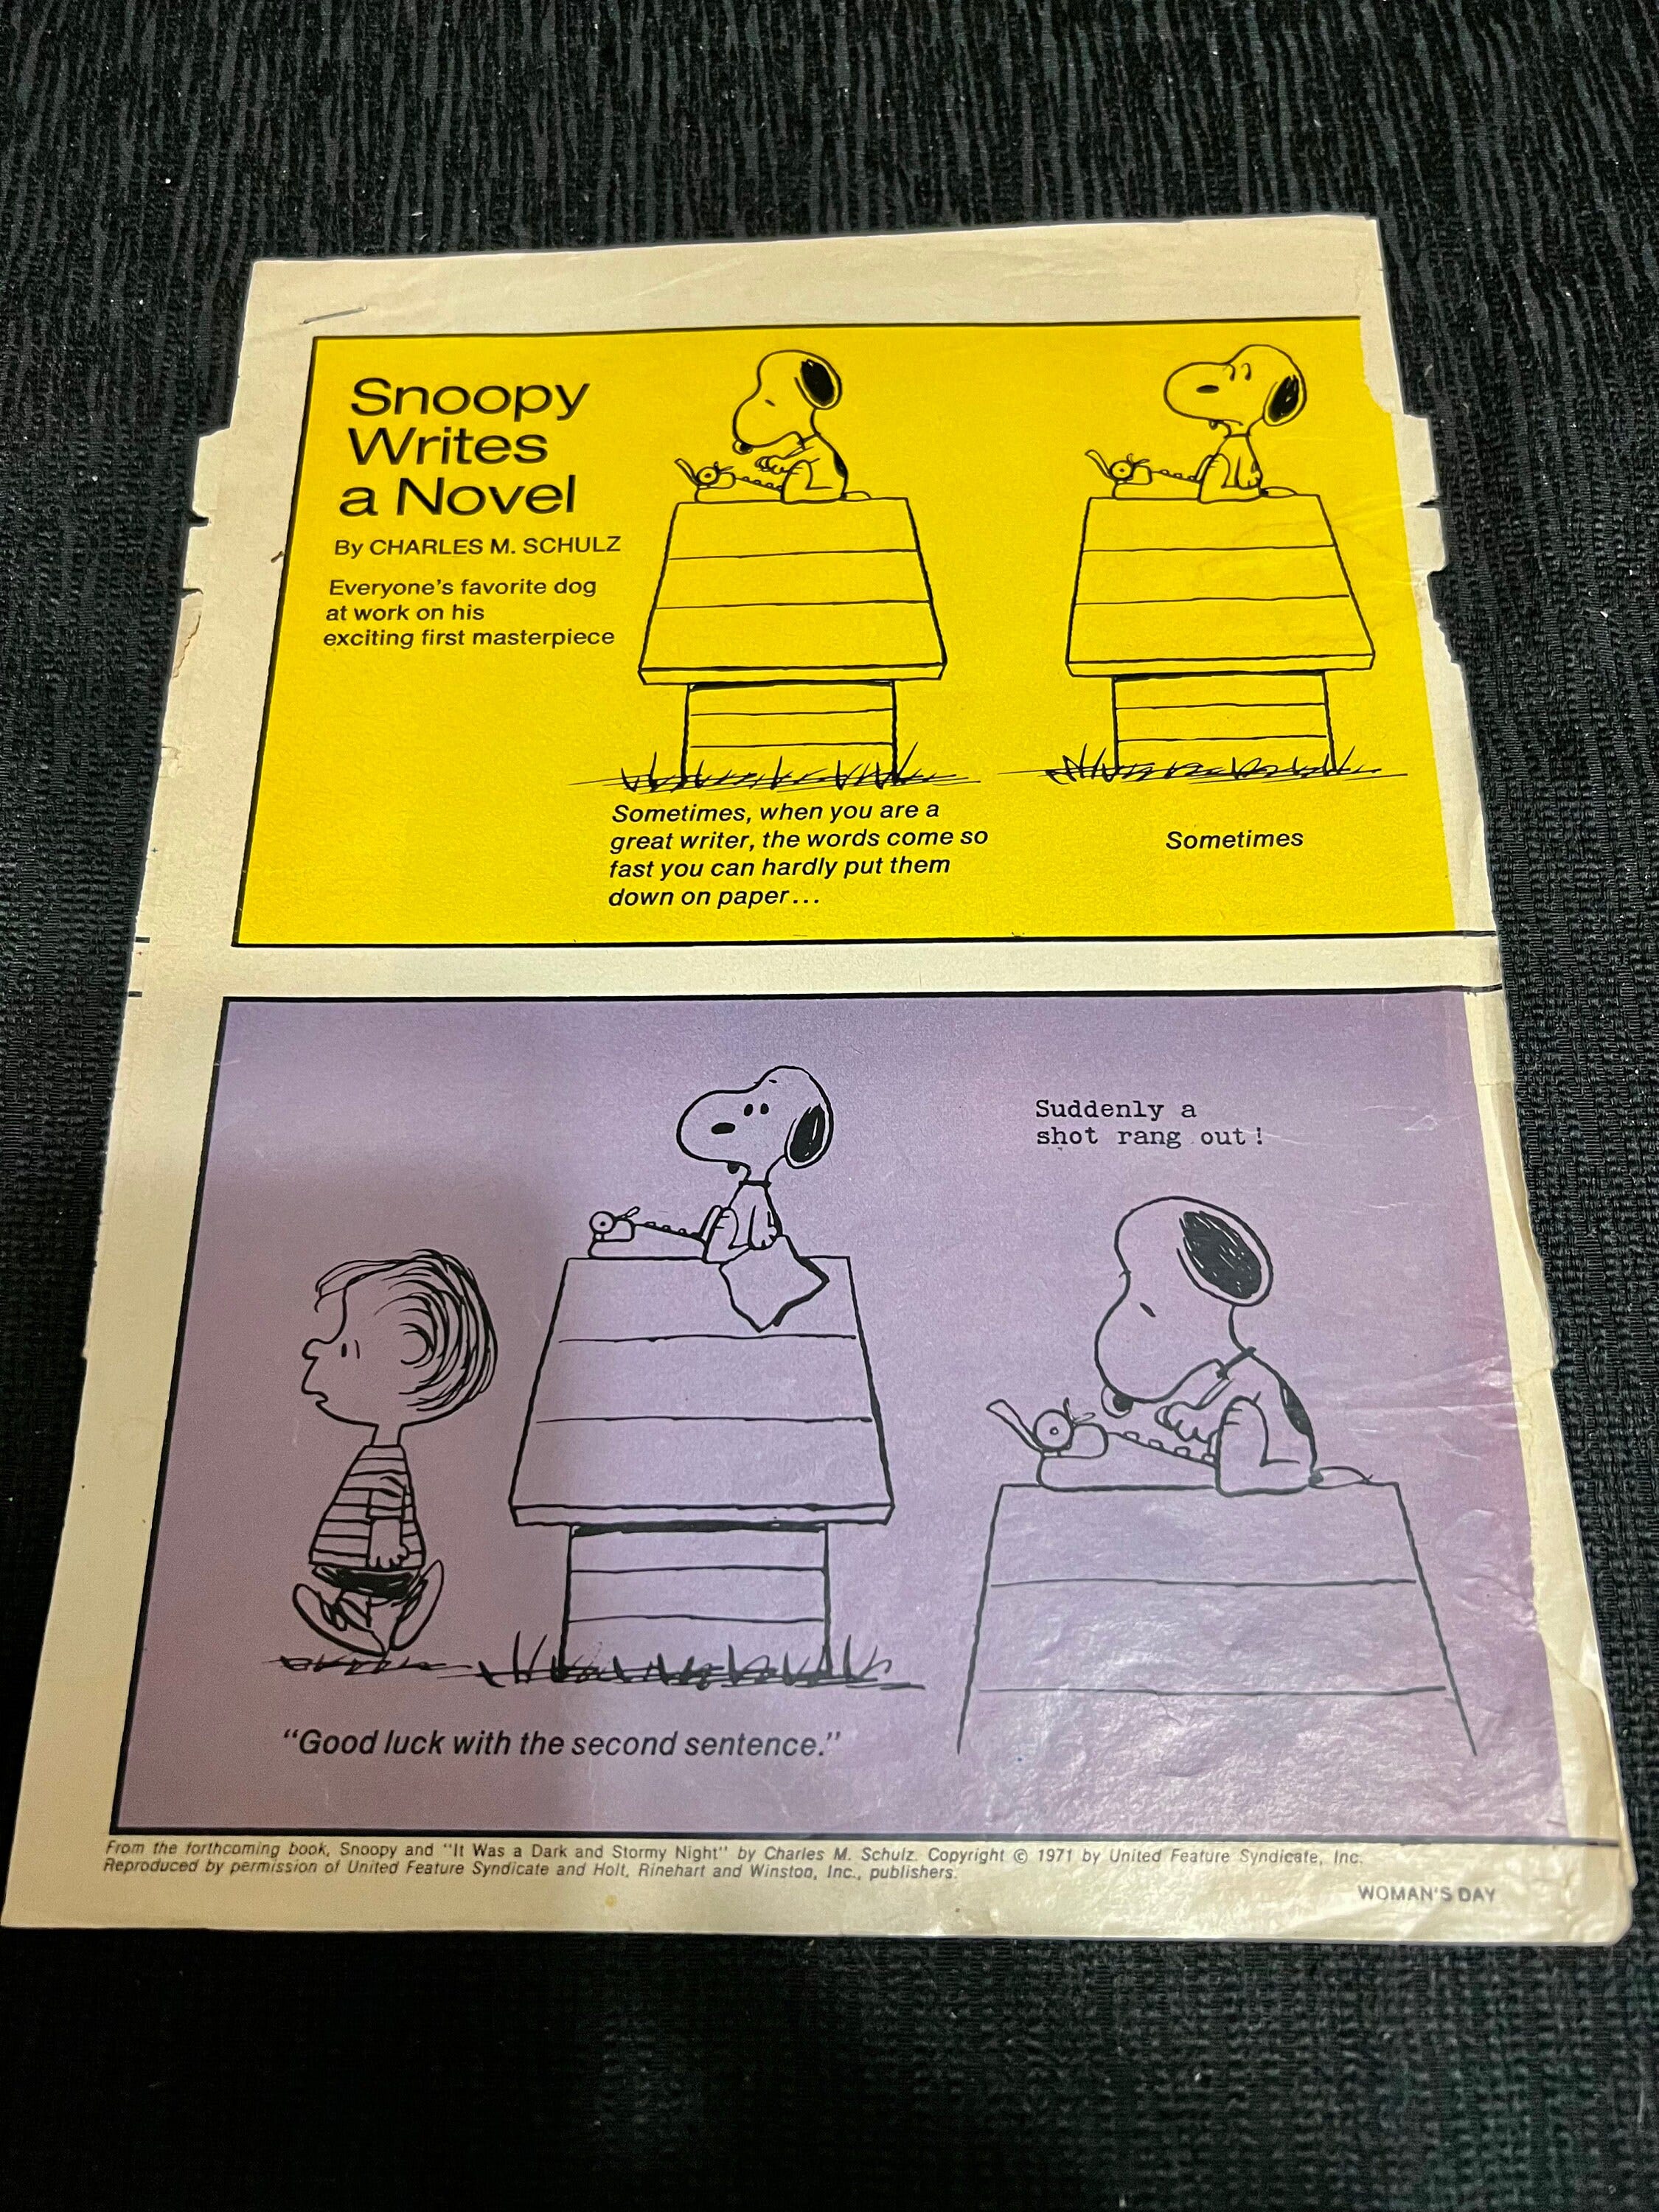 1971 Woman Day Magazine Pages Article Snoopy, Peanuts, Charlie Brown. “Snoopy writes a book”